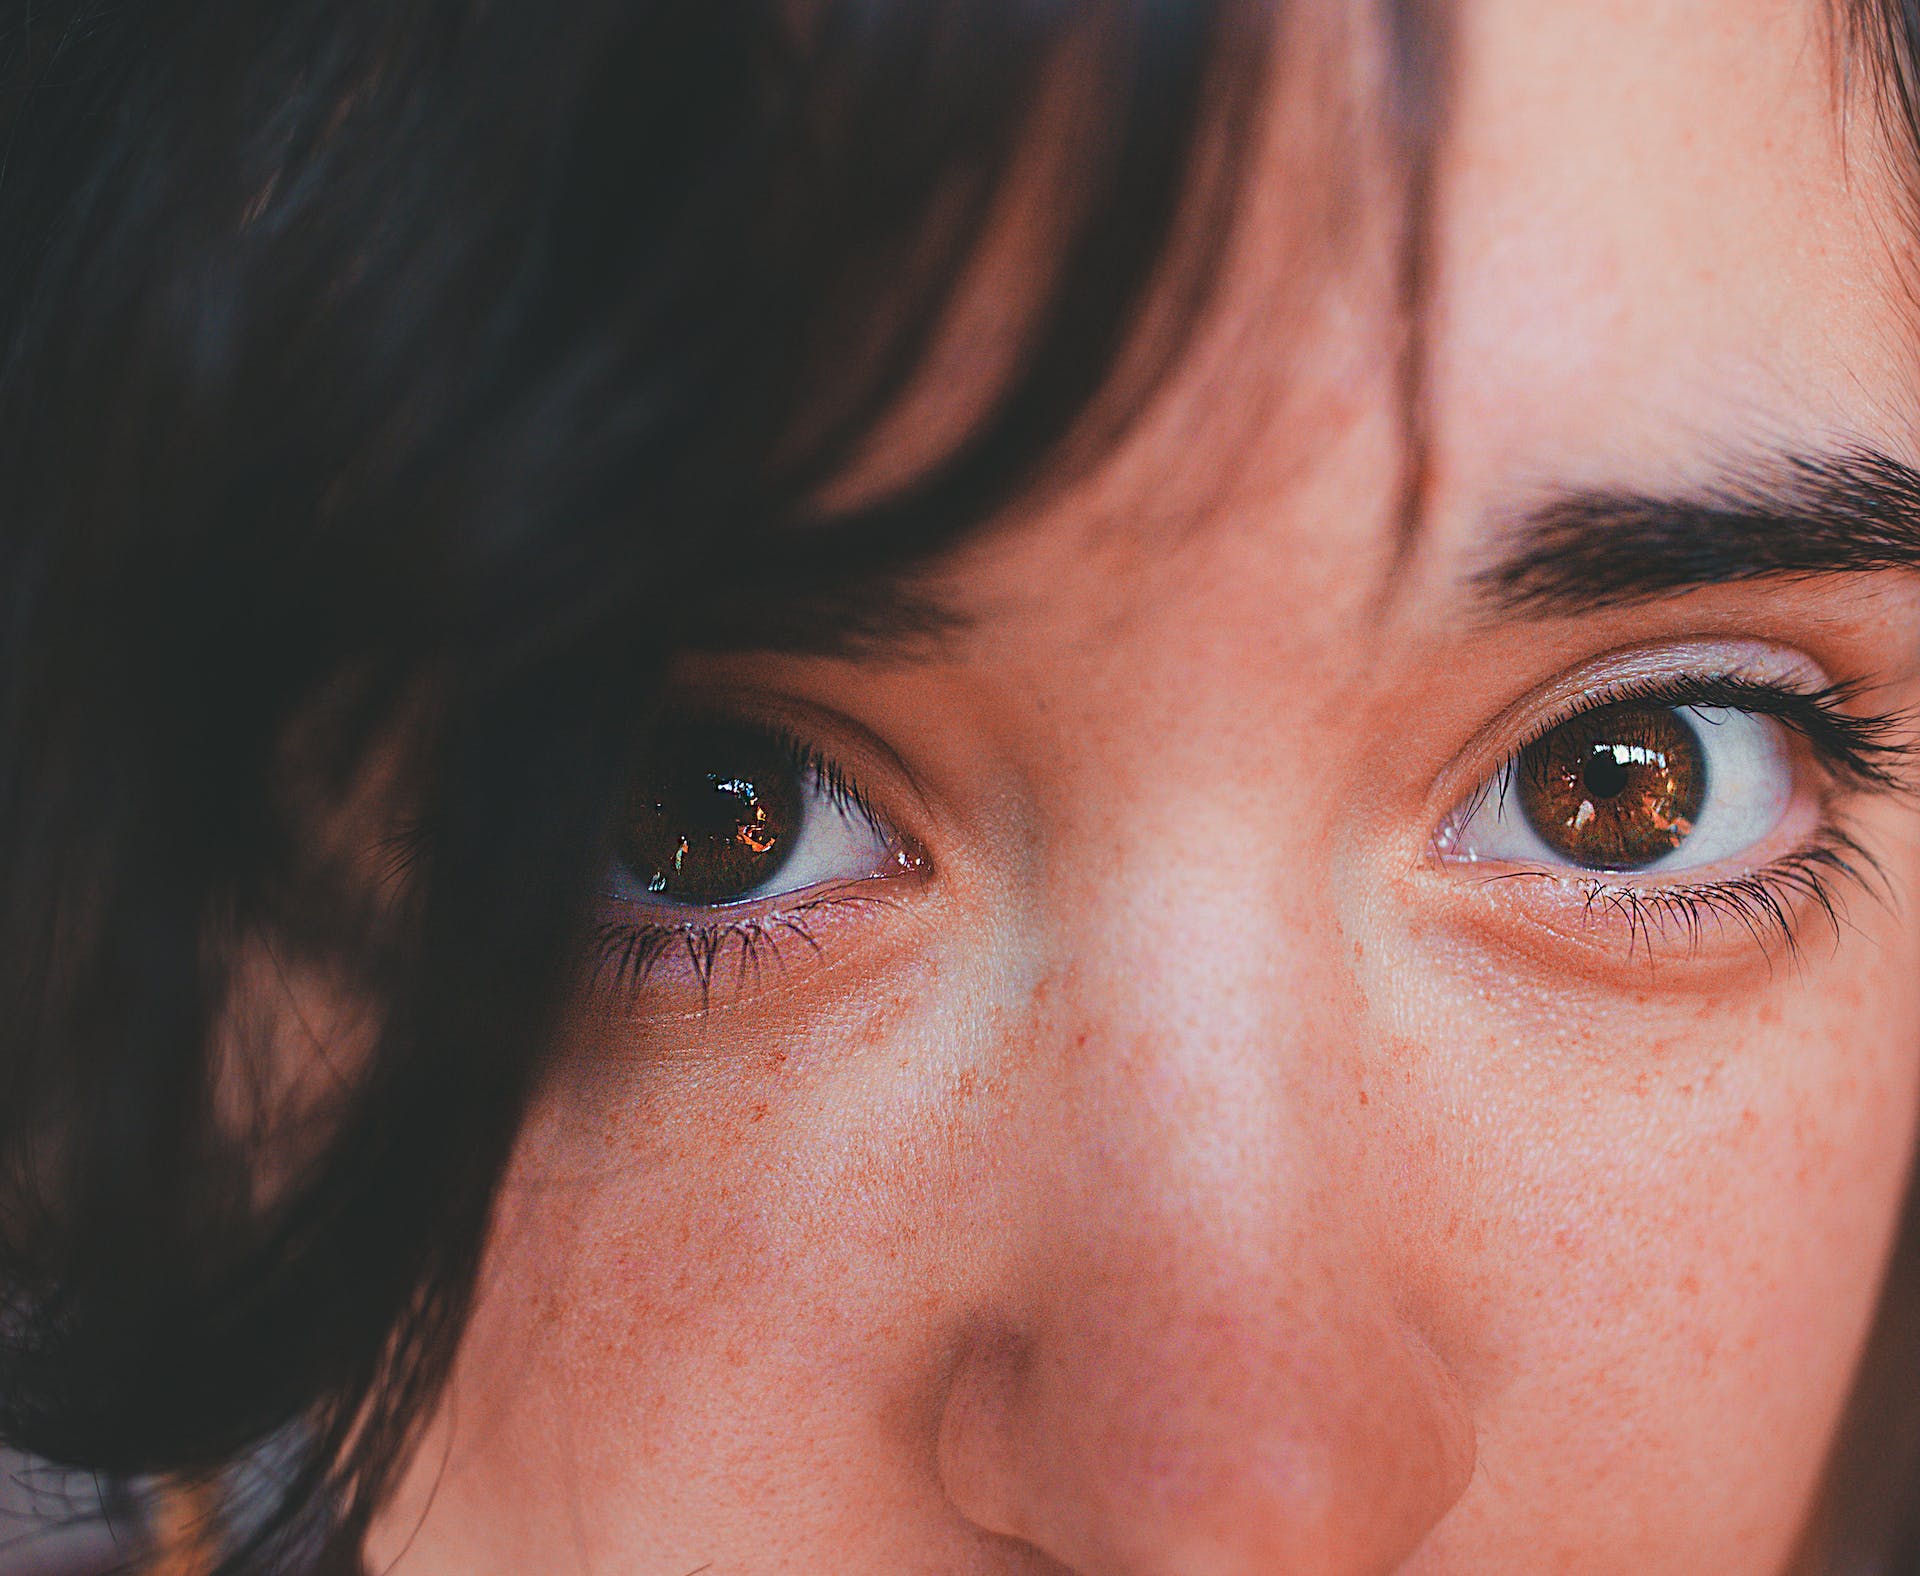 Close up of a woman with tear-filled eyes | Source: Pexels